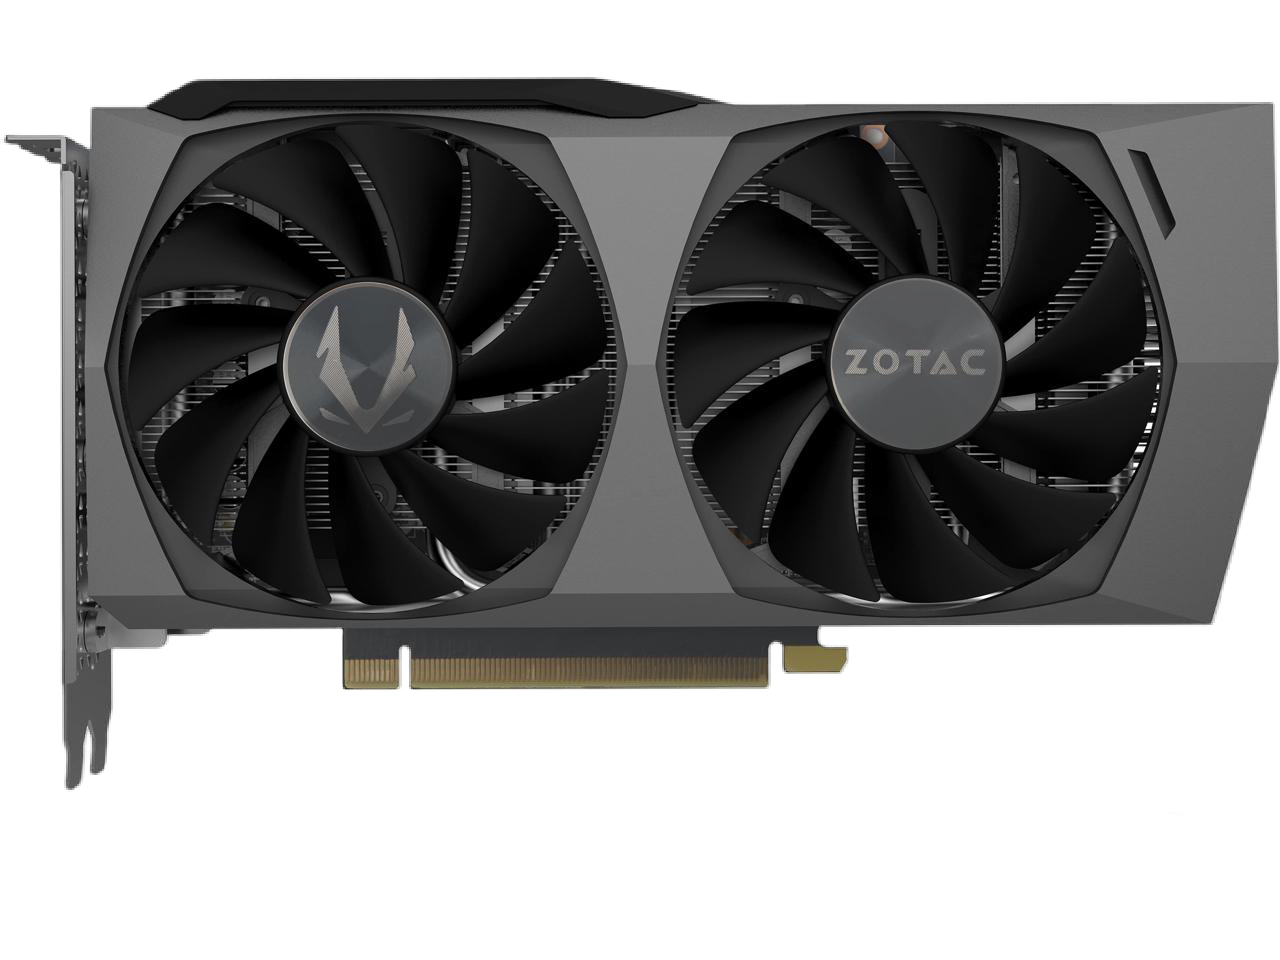 ZOTAC GAMING GeForce RTX 3060 Ti Twin Edge OC LHR 8GB GDDR6 256-bit 14 Gbps PCIE 4.0 Gaming Graphics Card, IceStorm 2.0 Advanced Cooling, Active Fan Control, FREEZE Fan Stop ZT-A30610H-10MLHR